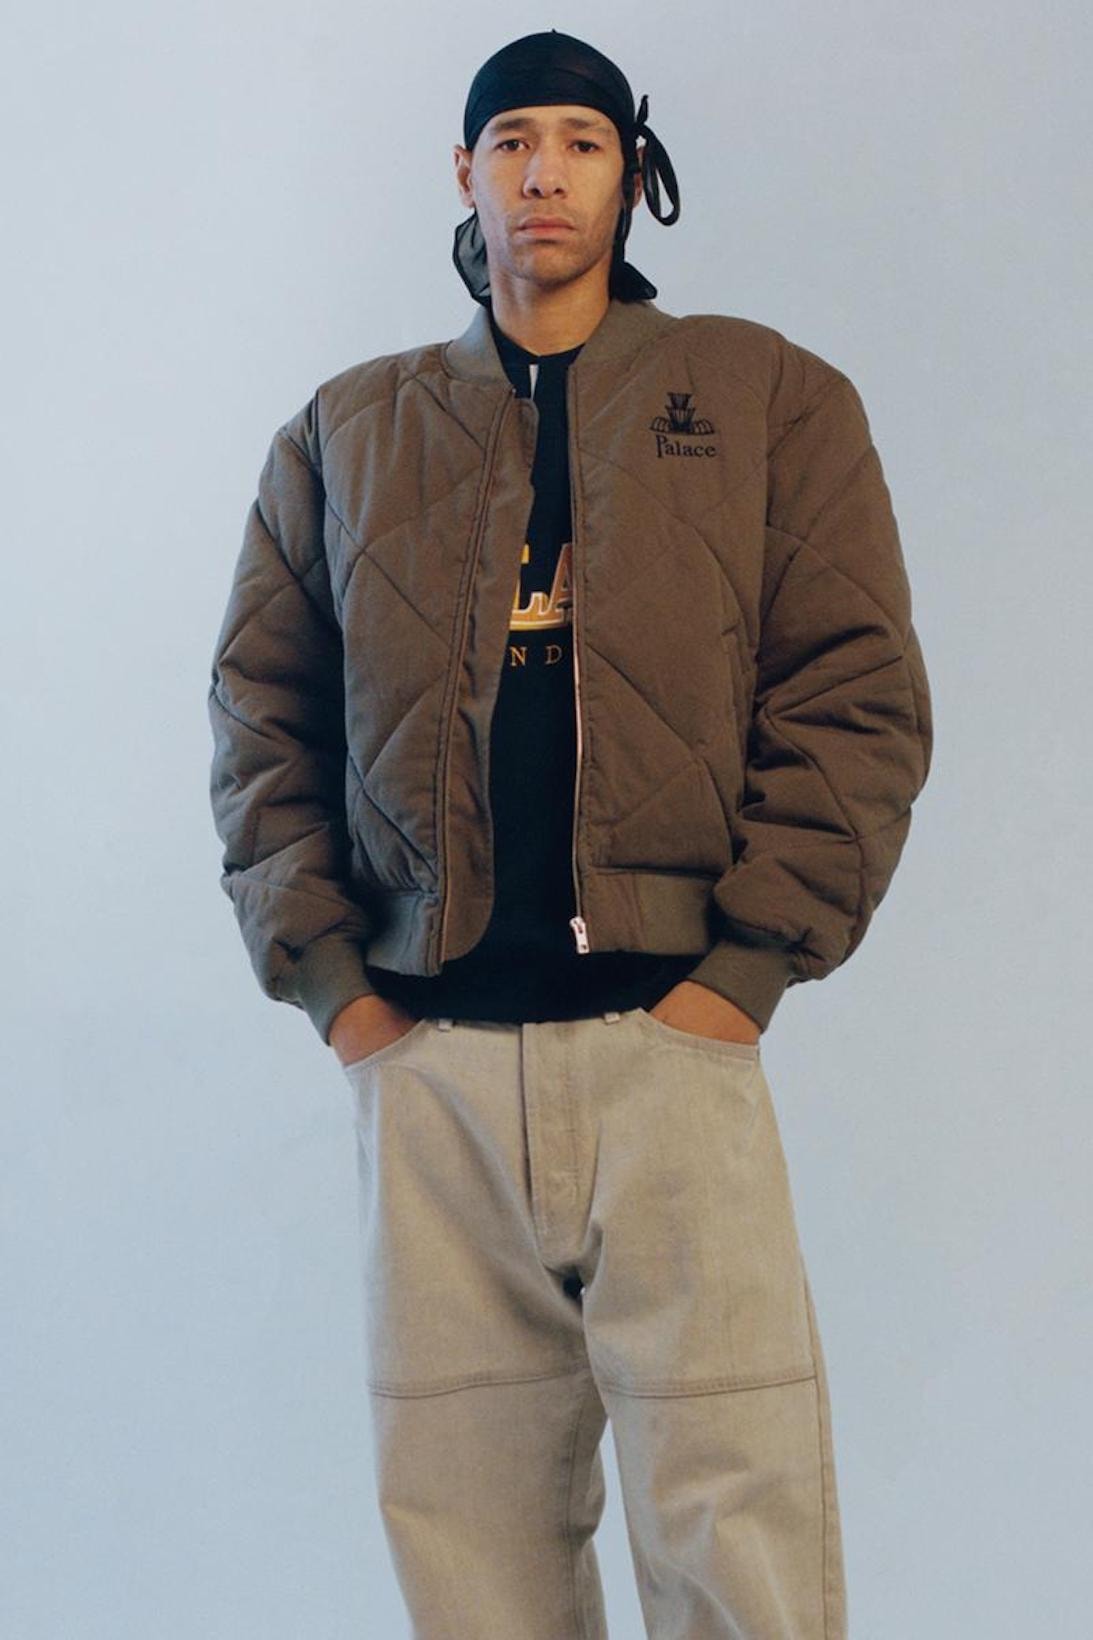 palace skateboards spring summer collection lookbook outerwear jacket pants